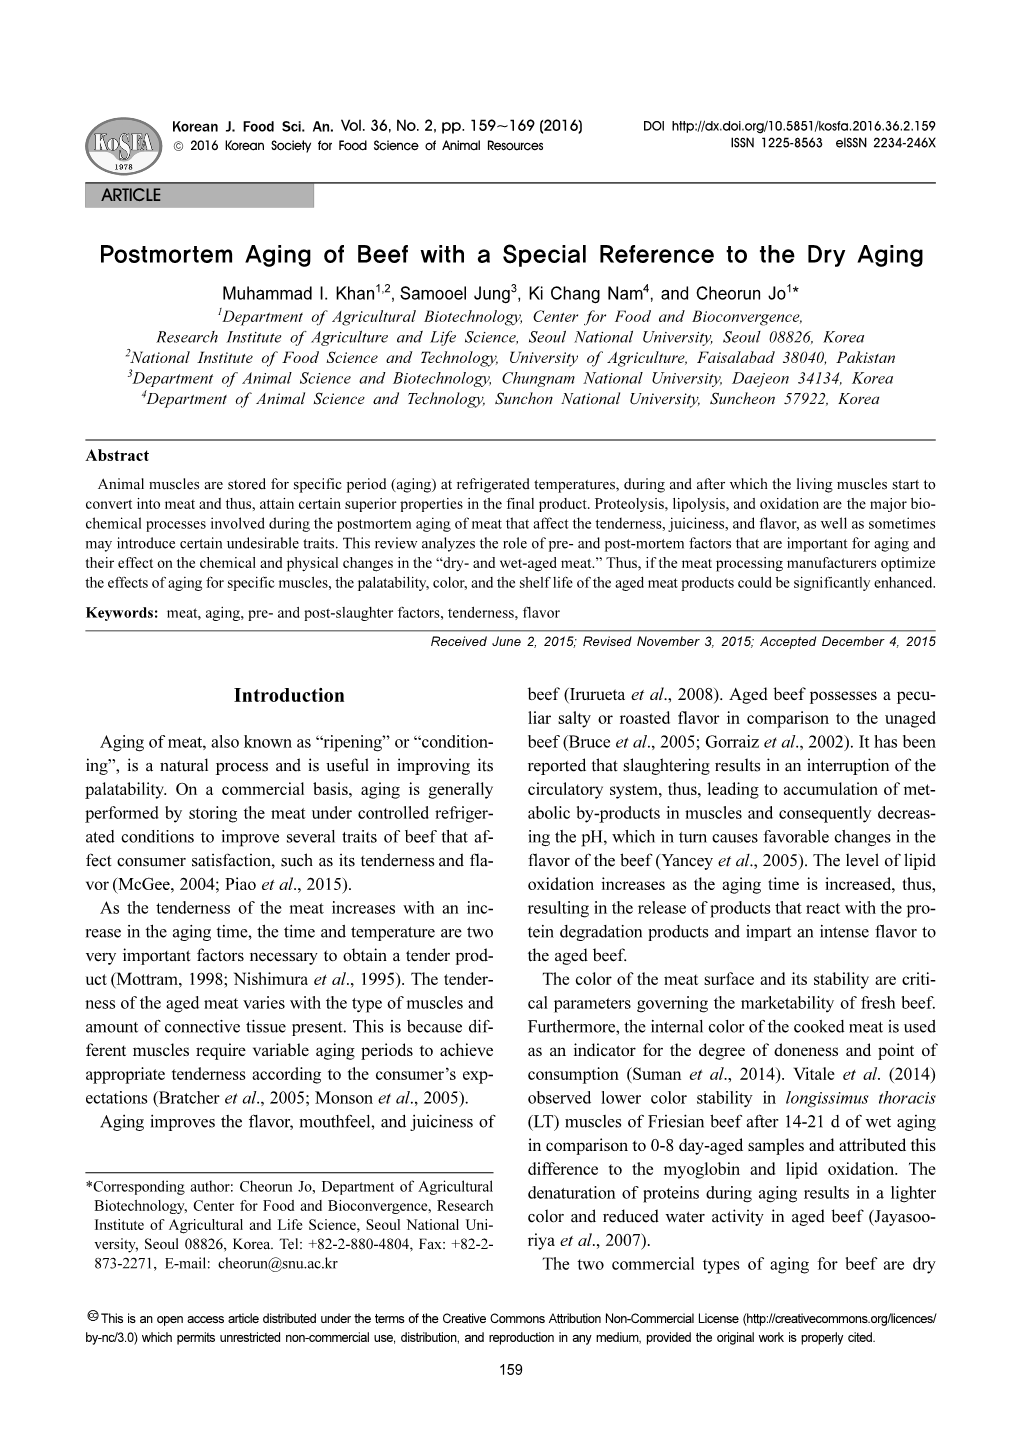 Postmortem Aging of Beef with a Special Reference to the Dry Aging